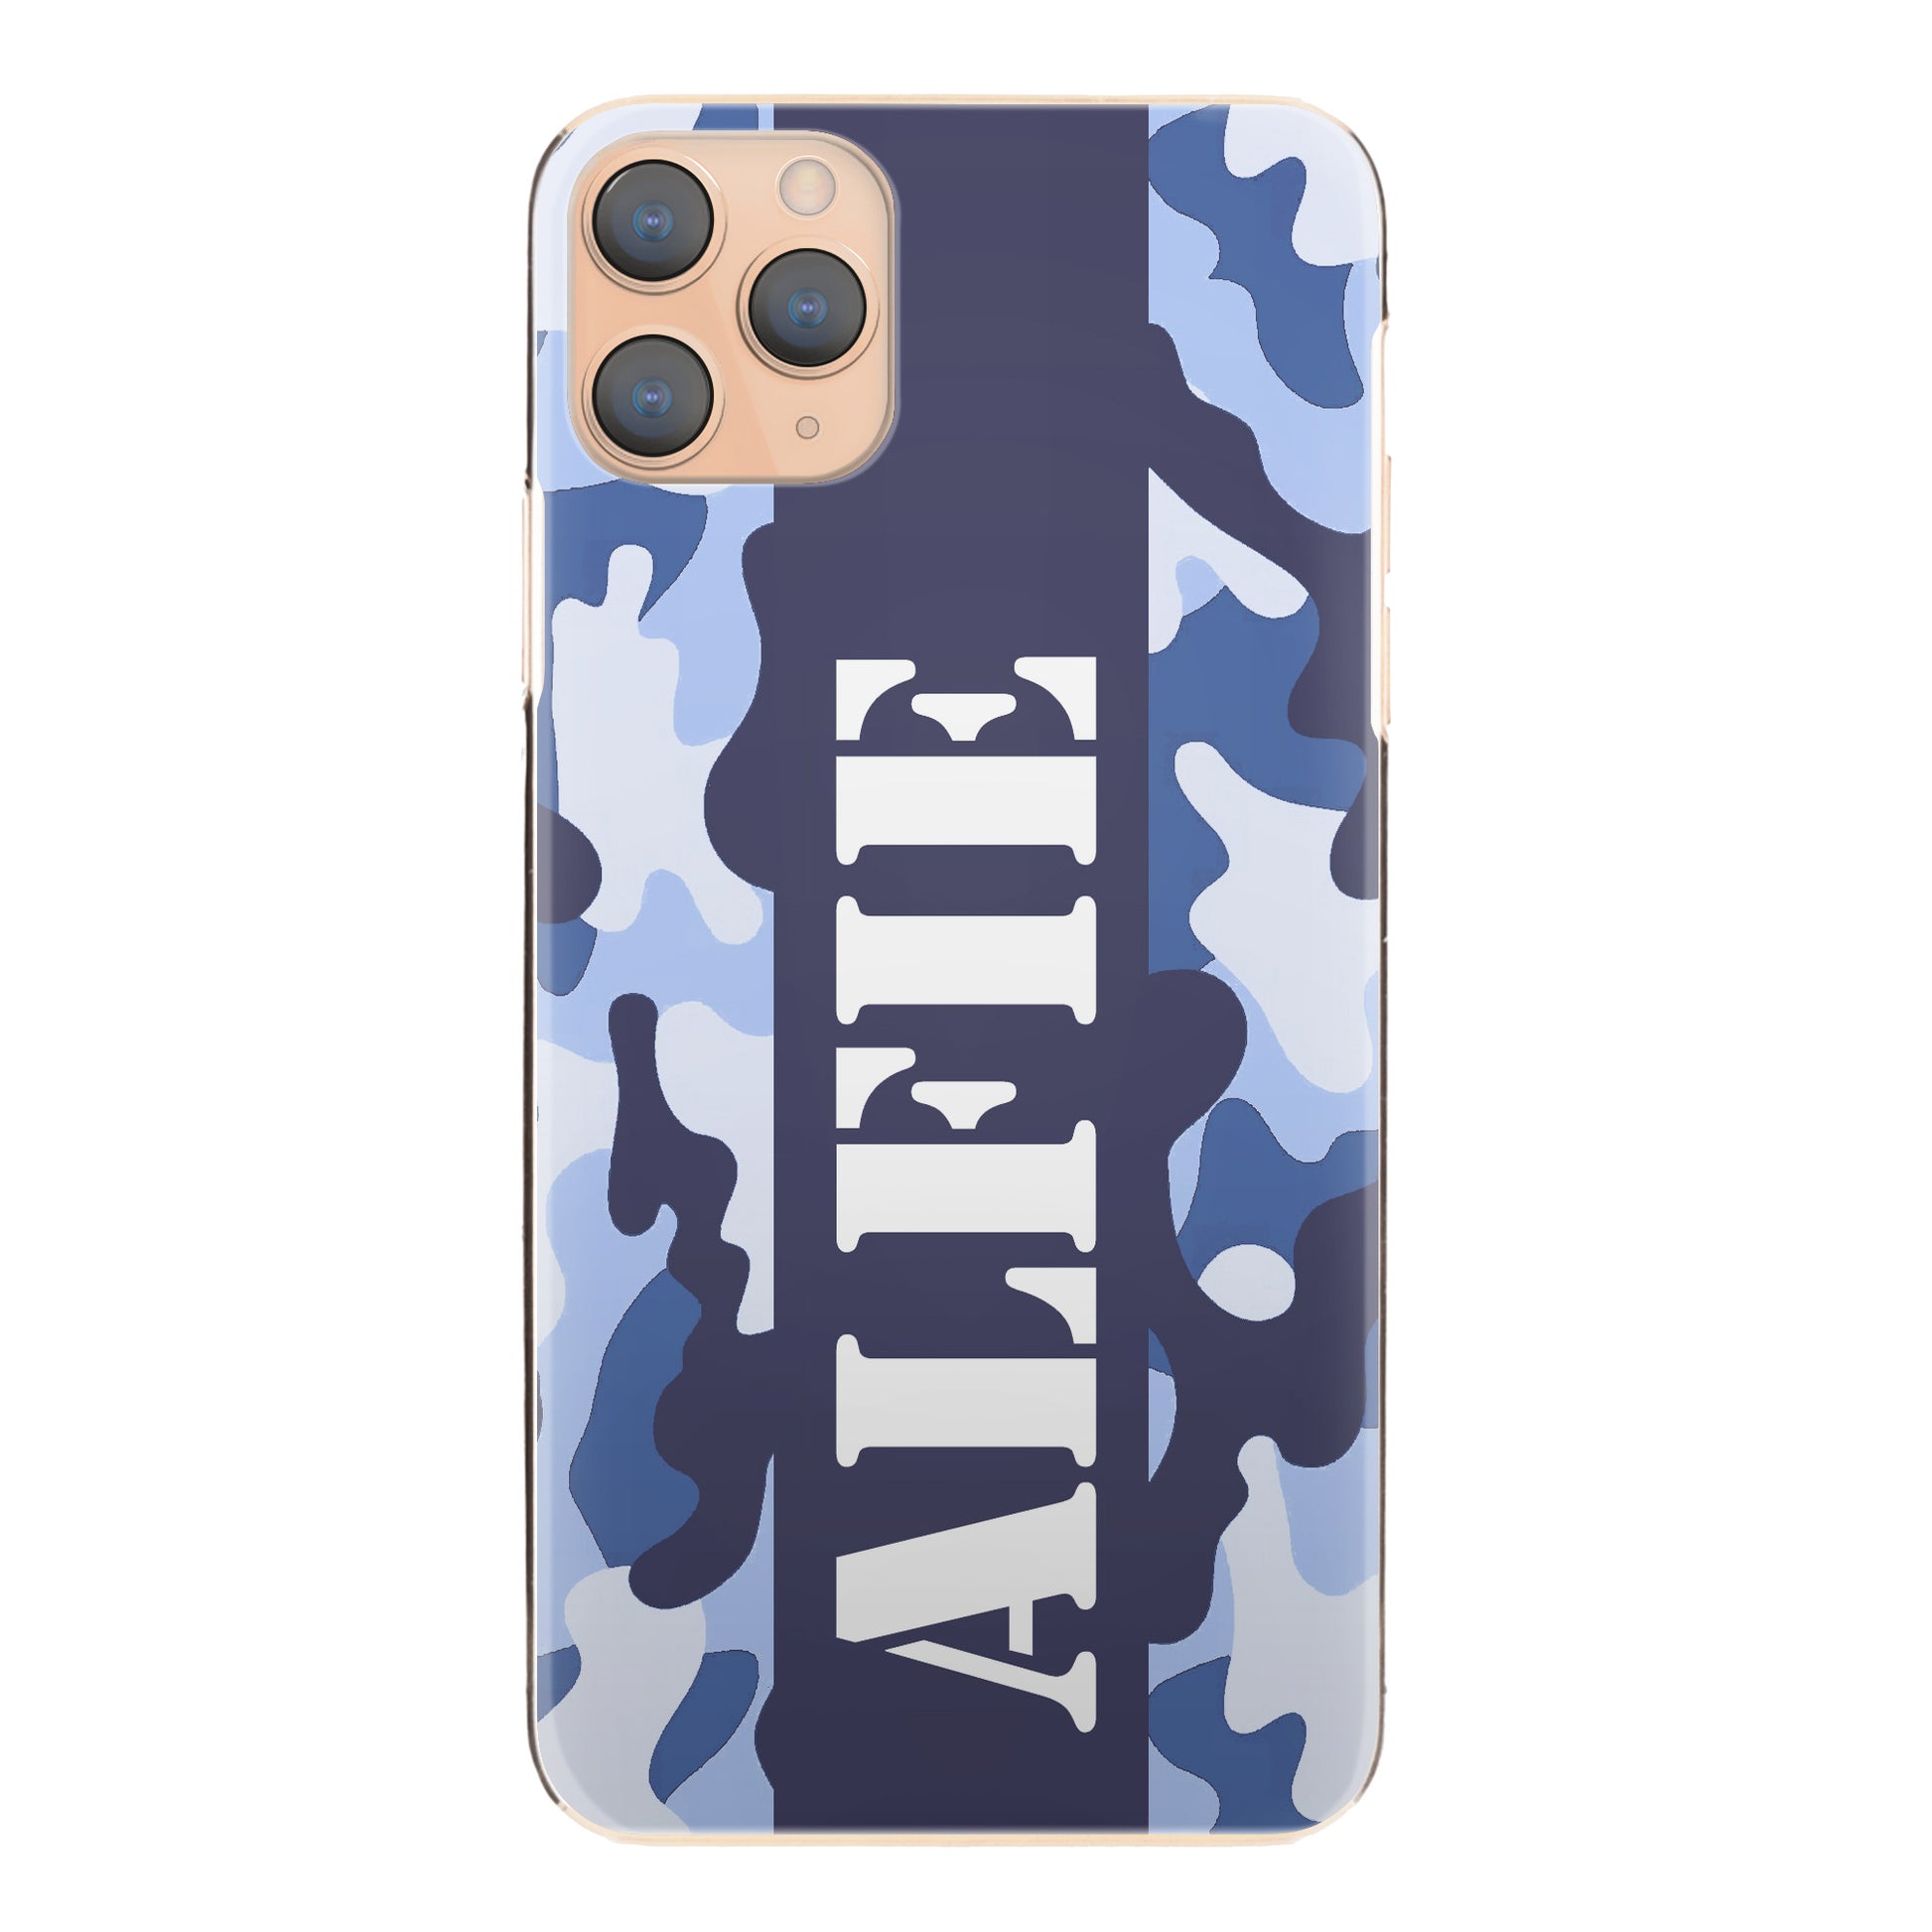 Personalised Huawei Phone Hard Case with Military Text on Blue Camo